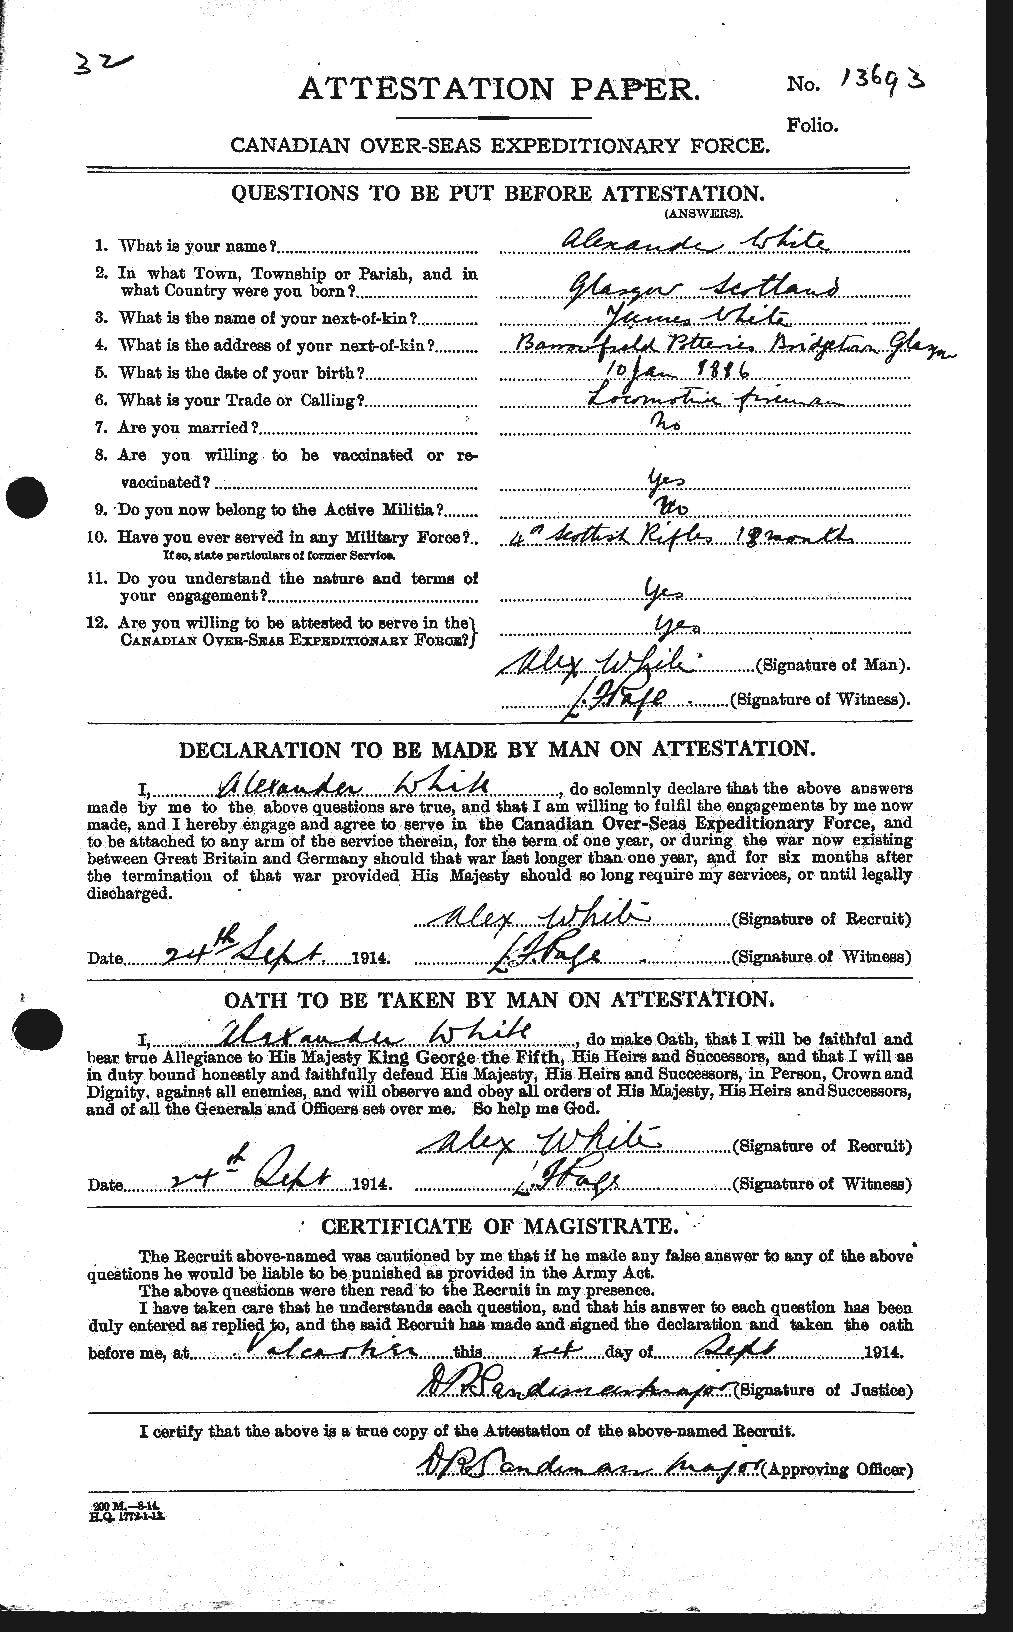 Personnel Records of the First World War - CEF 669757a